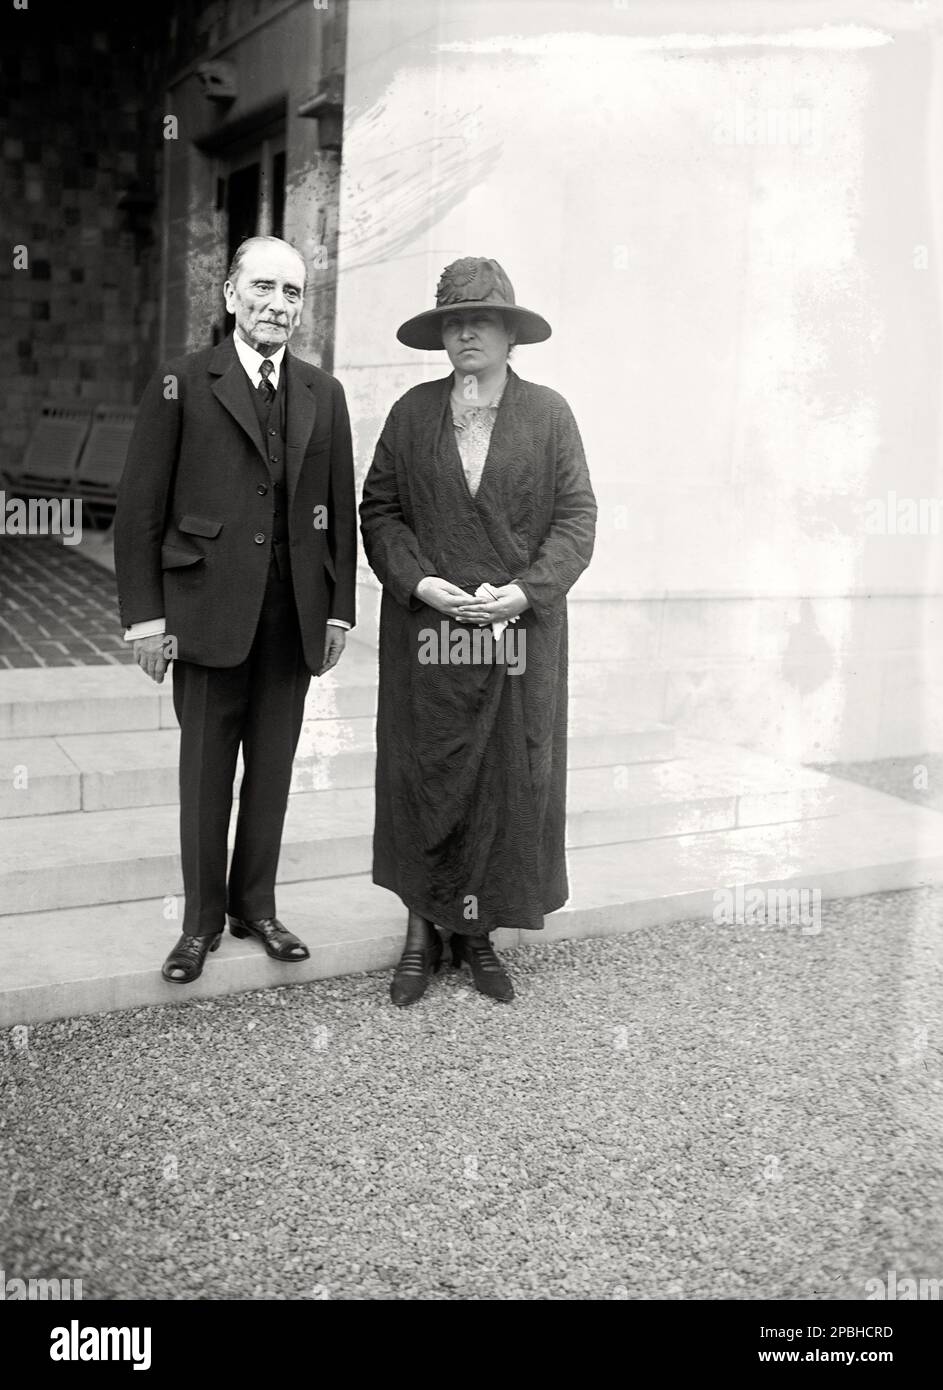 1924 , 14 may , Washington , USA : The chilean  woman poet GABRIELA MISTRAL ( 1889 - 1957 ) ,future  Nobel for Literature in 1945 , in this photo with the chilean ambassador in USA  Hon. Beltran MATHIEU Andrews - SCRITTORE - SCRITTRICE - LETTERATO - LITERATURE - LETTERATURA  - POETESSA - POETA - POESIA - POETRY -  Premio Nibel - Cile - Chile - book - libro  ----  Archivio GBB Stock Photo